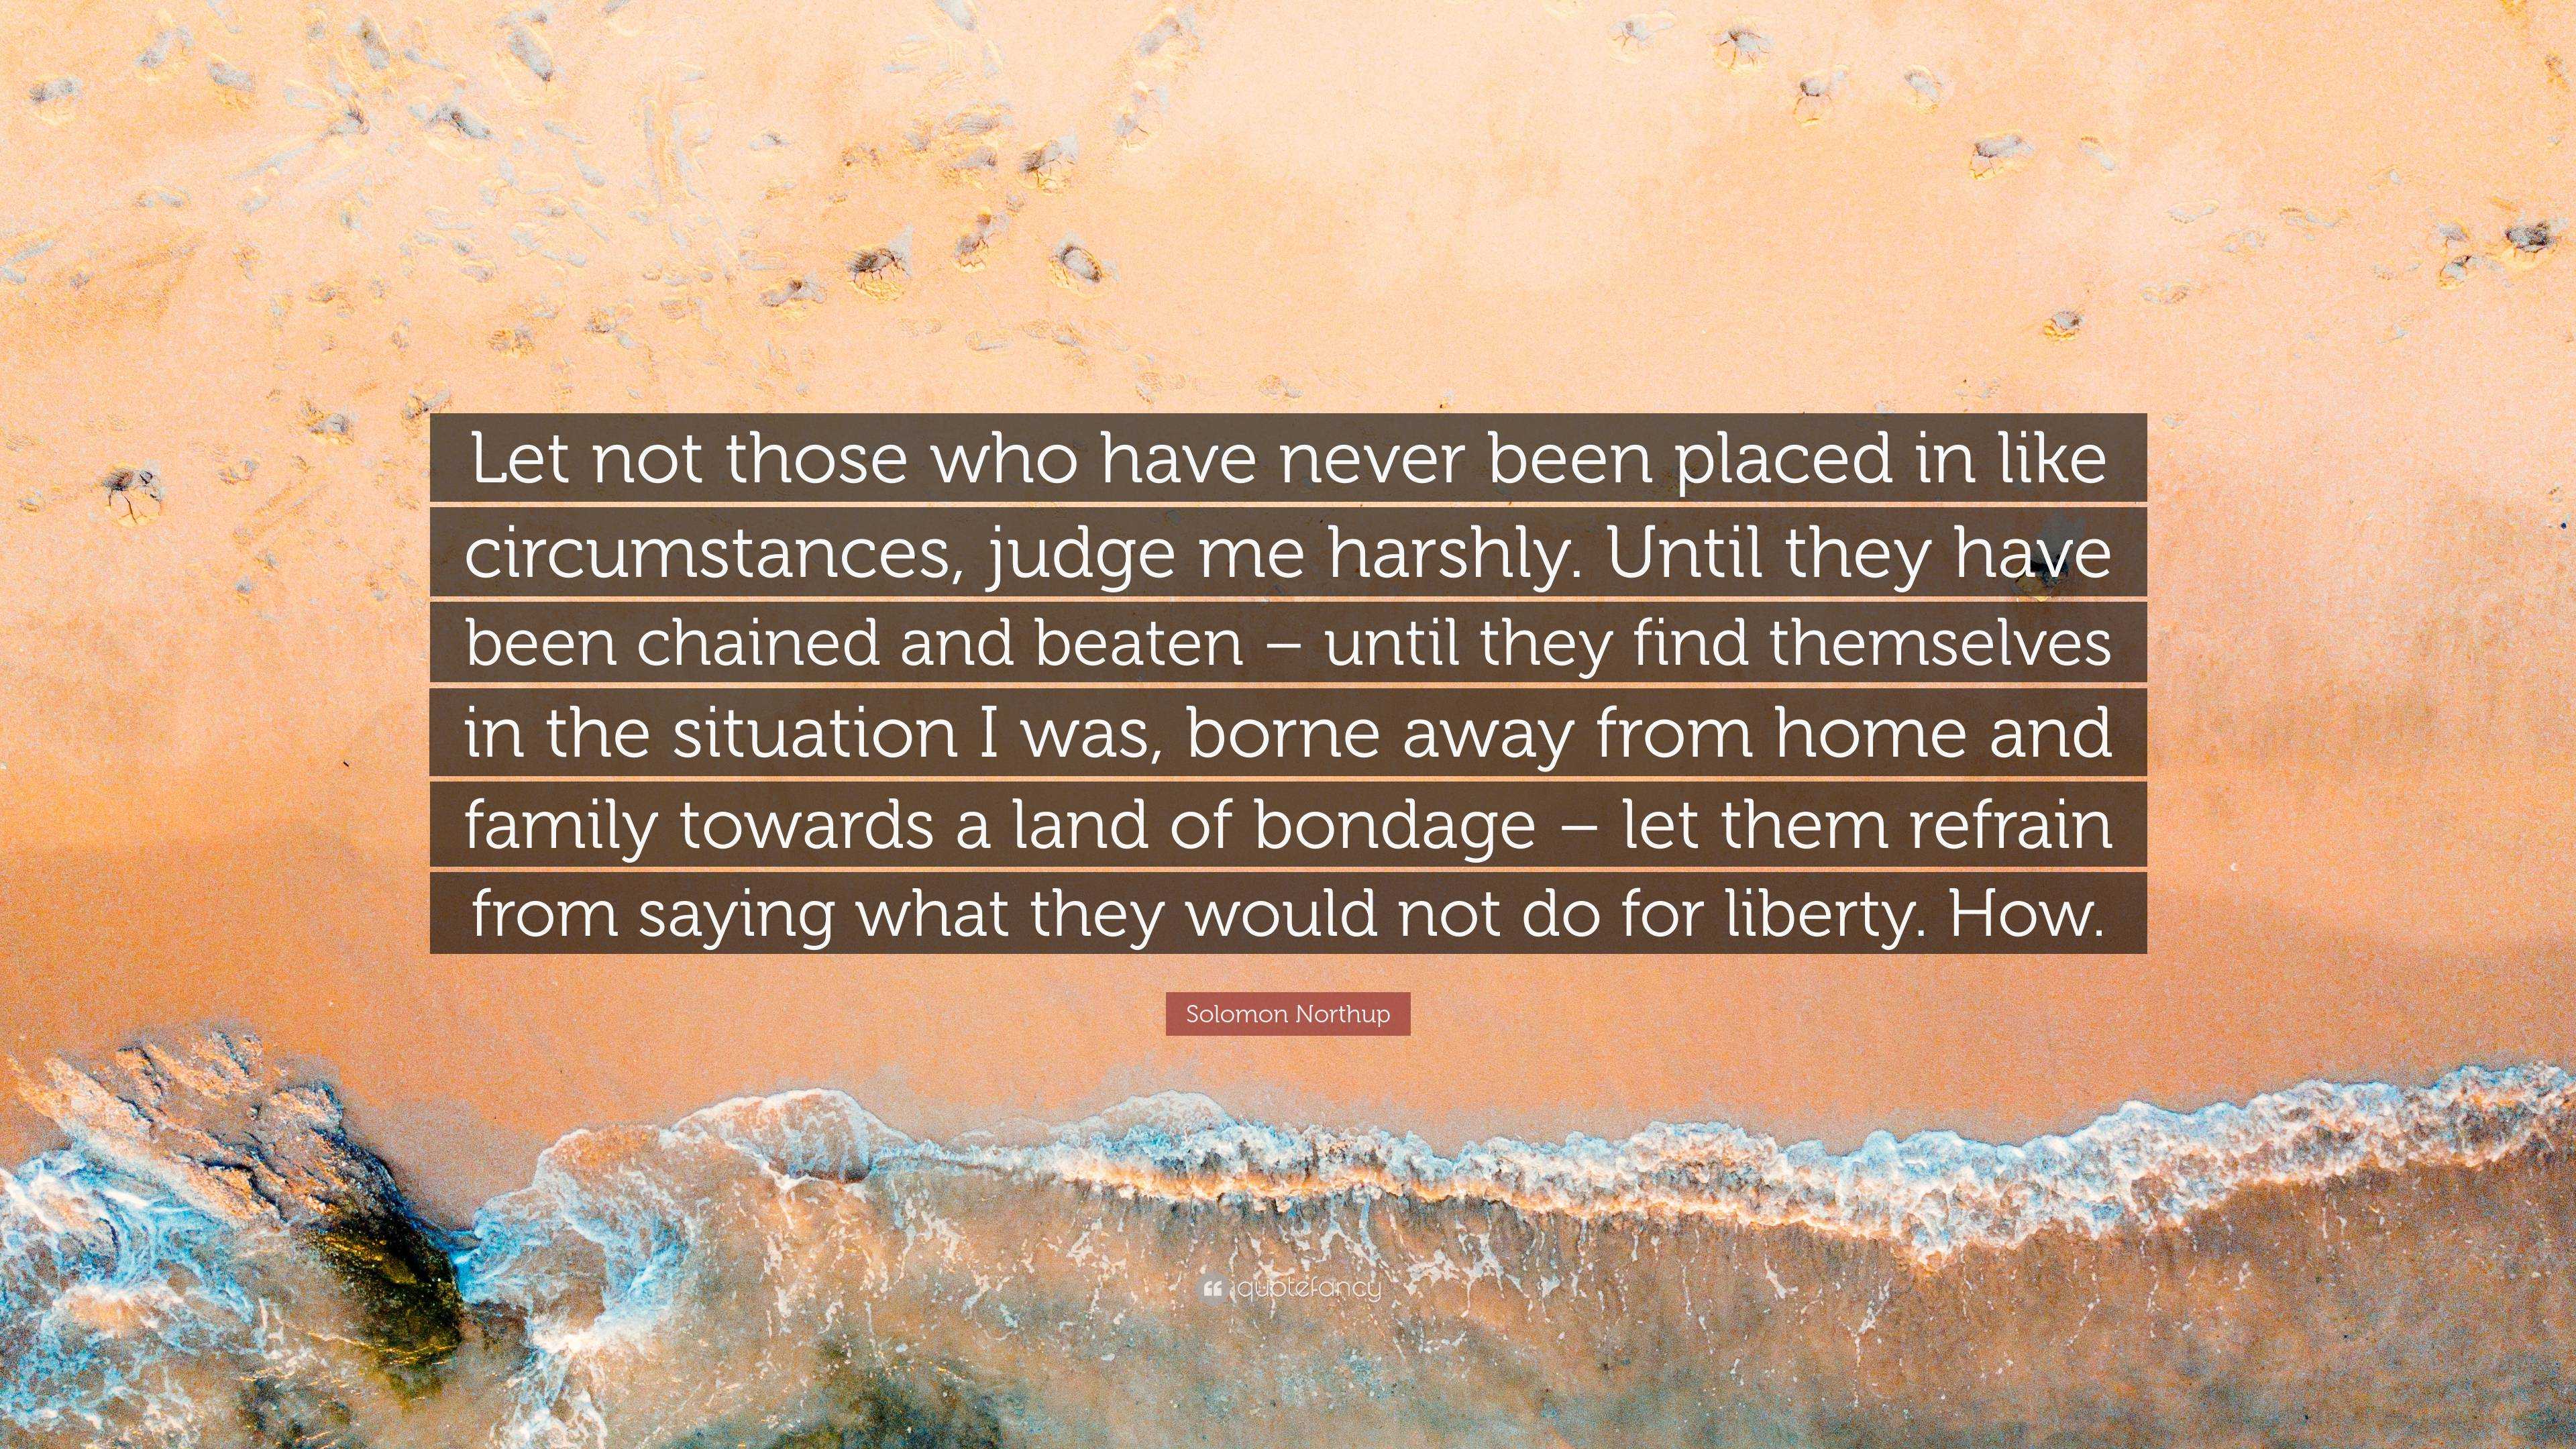 Solomon Northup Quote: “Let not those who have never been placed in ...